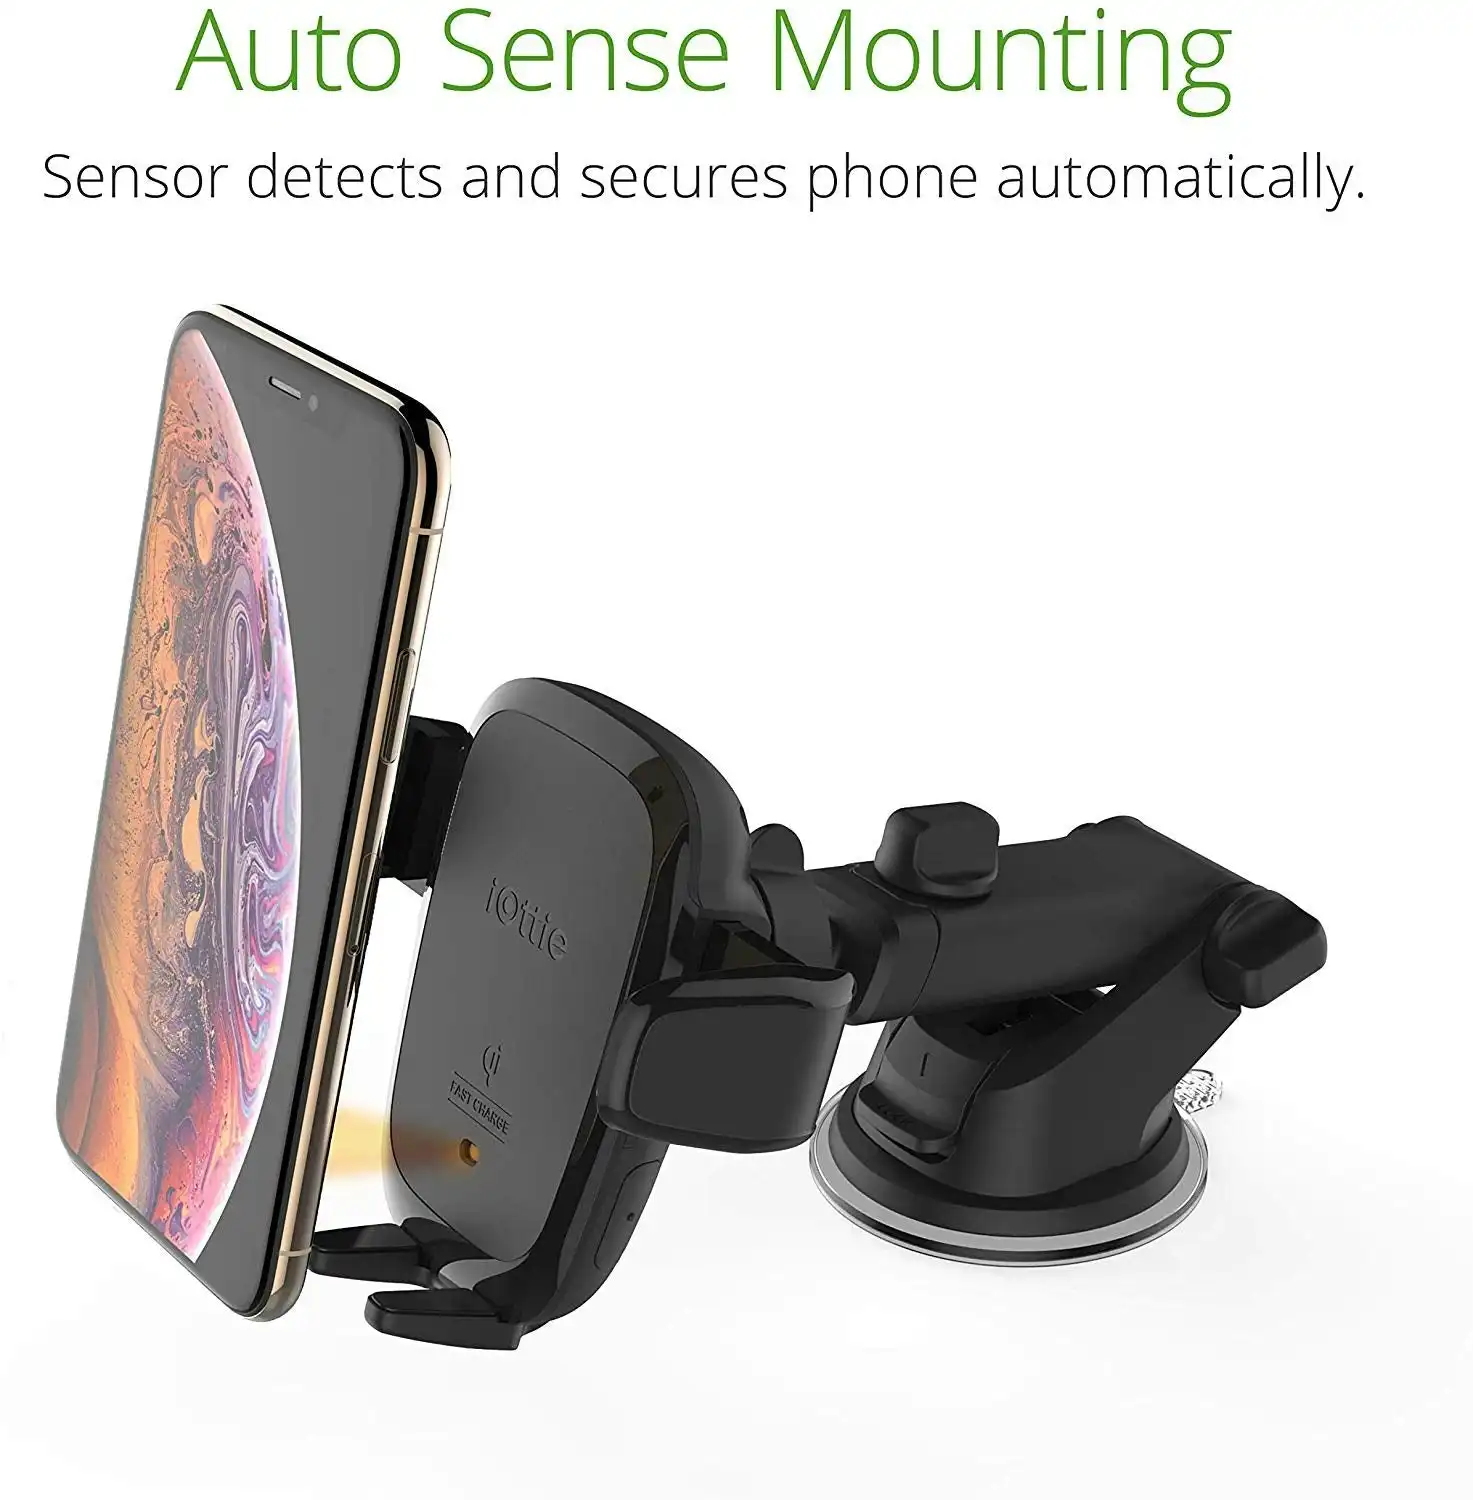 iOttie Auto Sense Automatic Clamping Qi Wireless Charging Dashboard Car Phone Mount, Car Charger || for iPhone, Samsung Galaxy, Huawei, LG, Smartphone